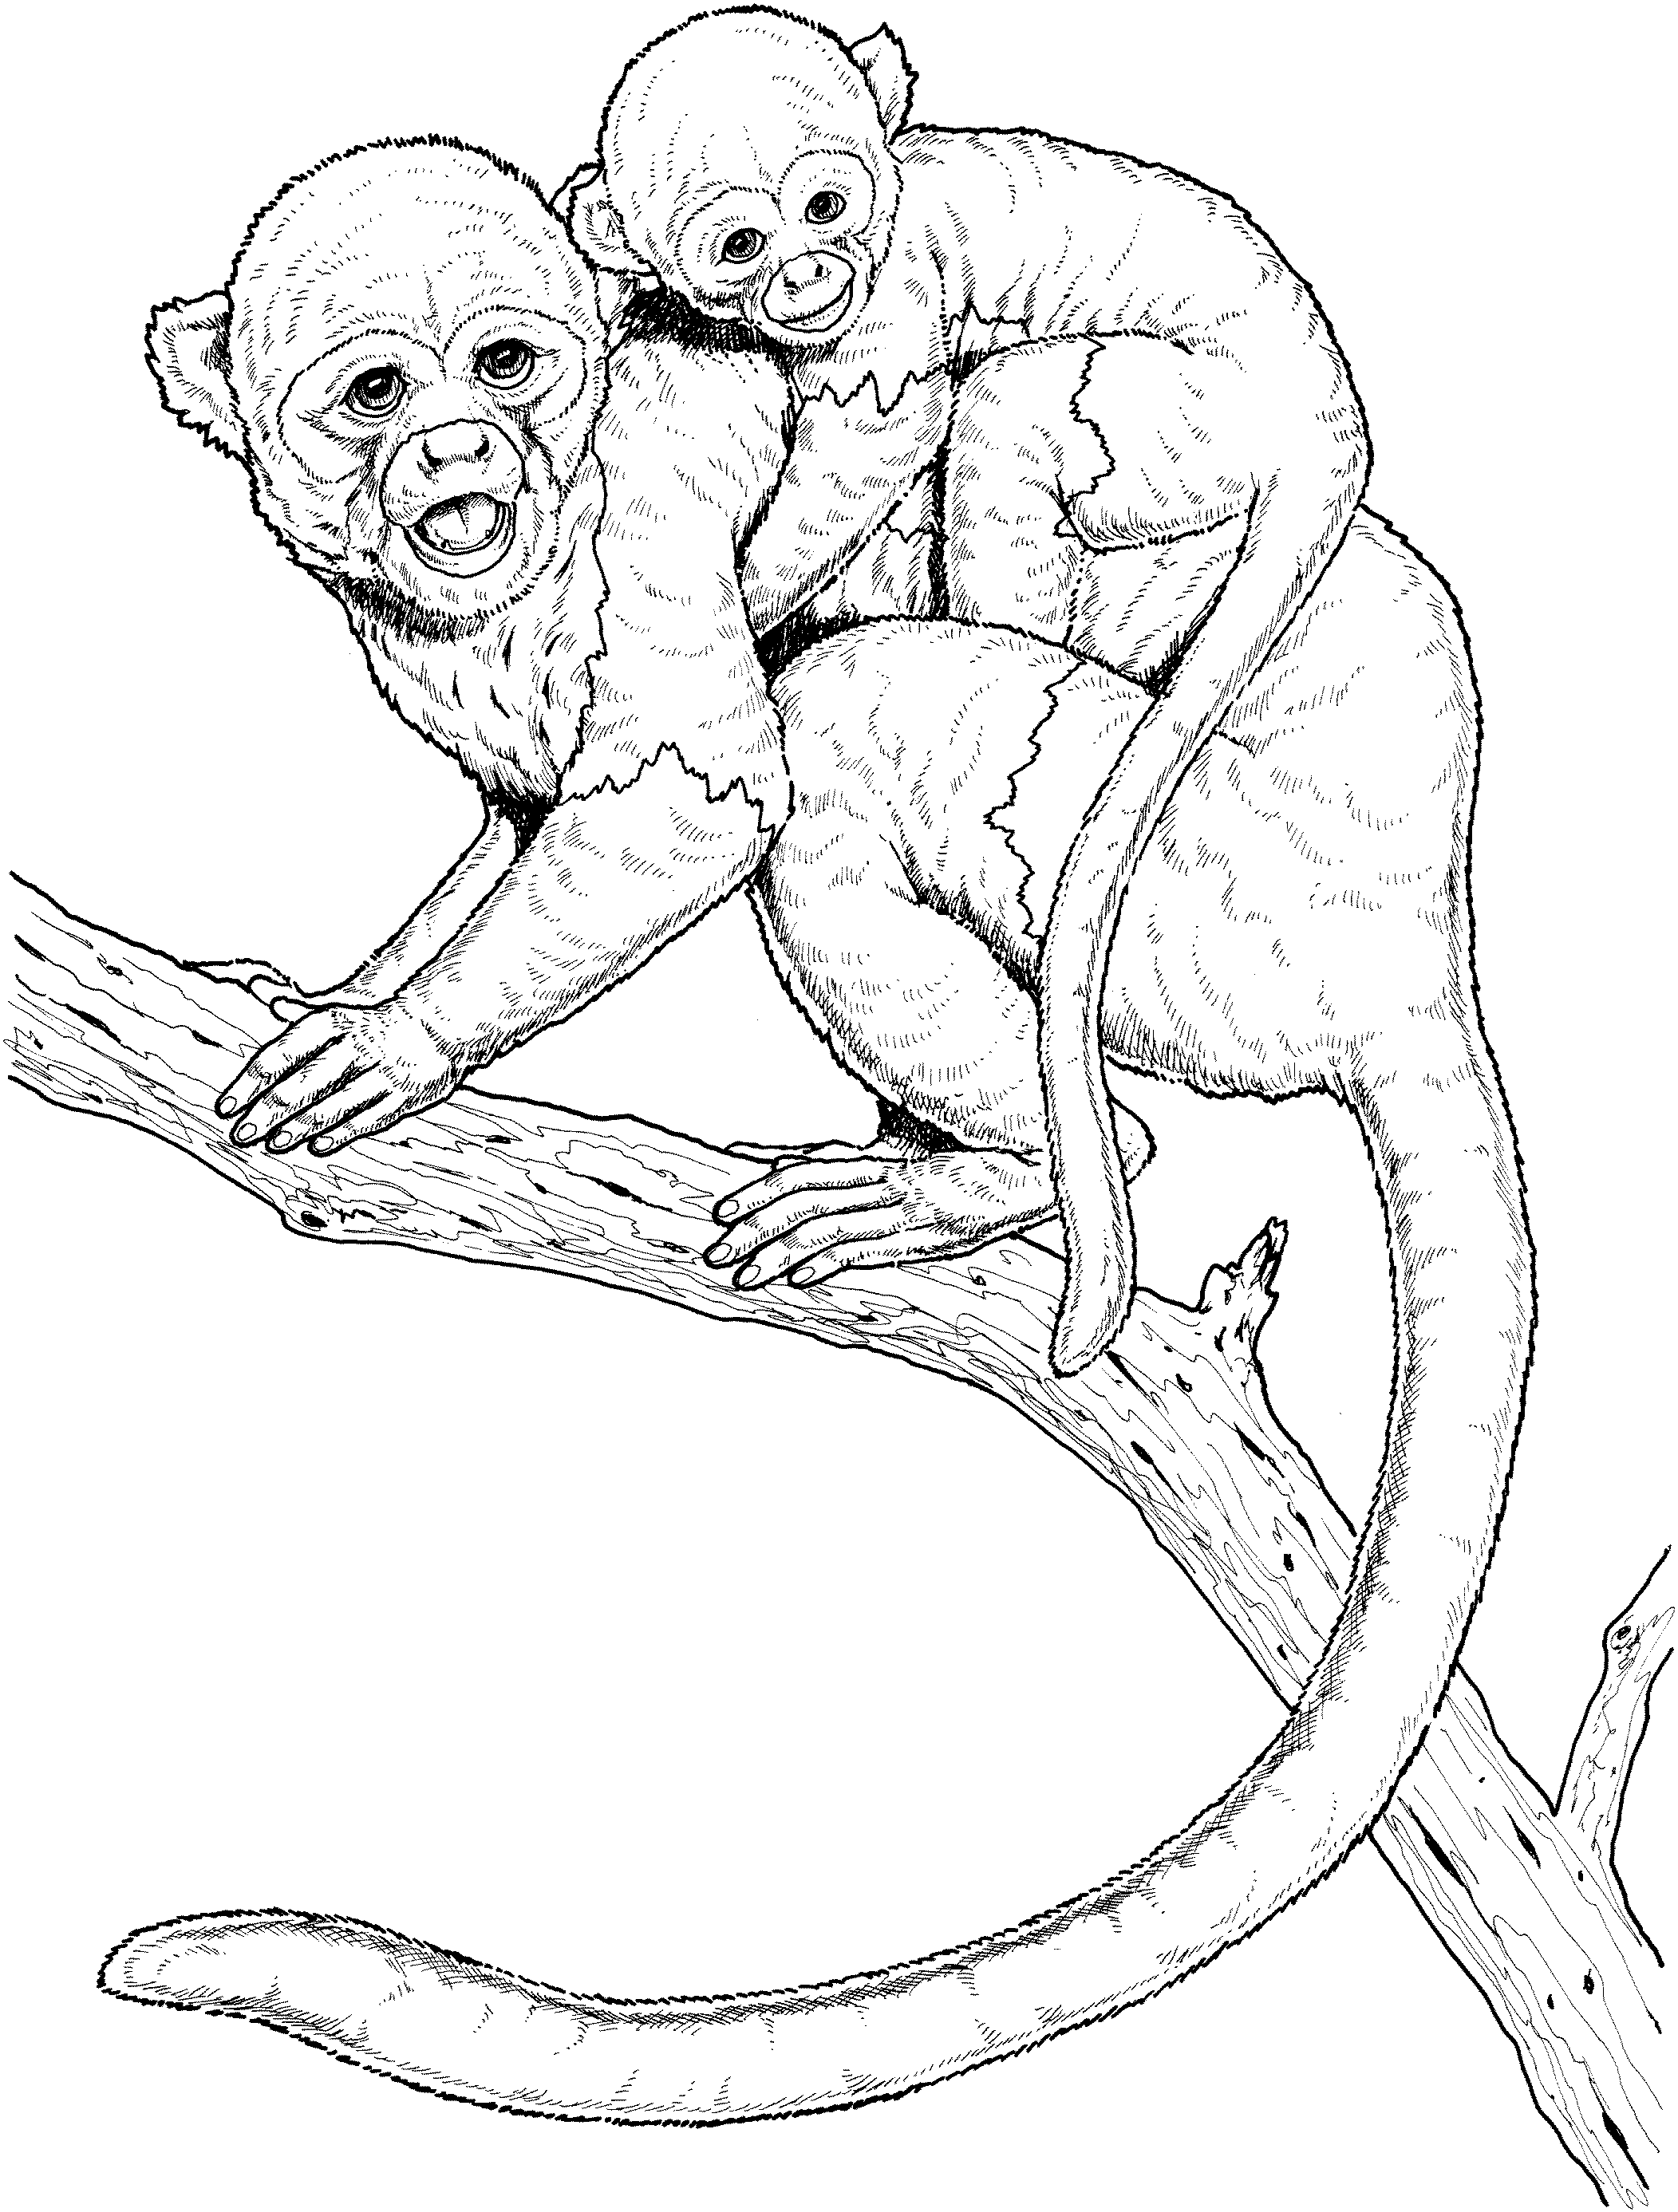 948 Cartoon Monkey Coloring Pages To Print for Adult